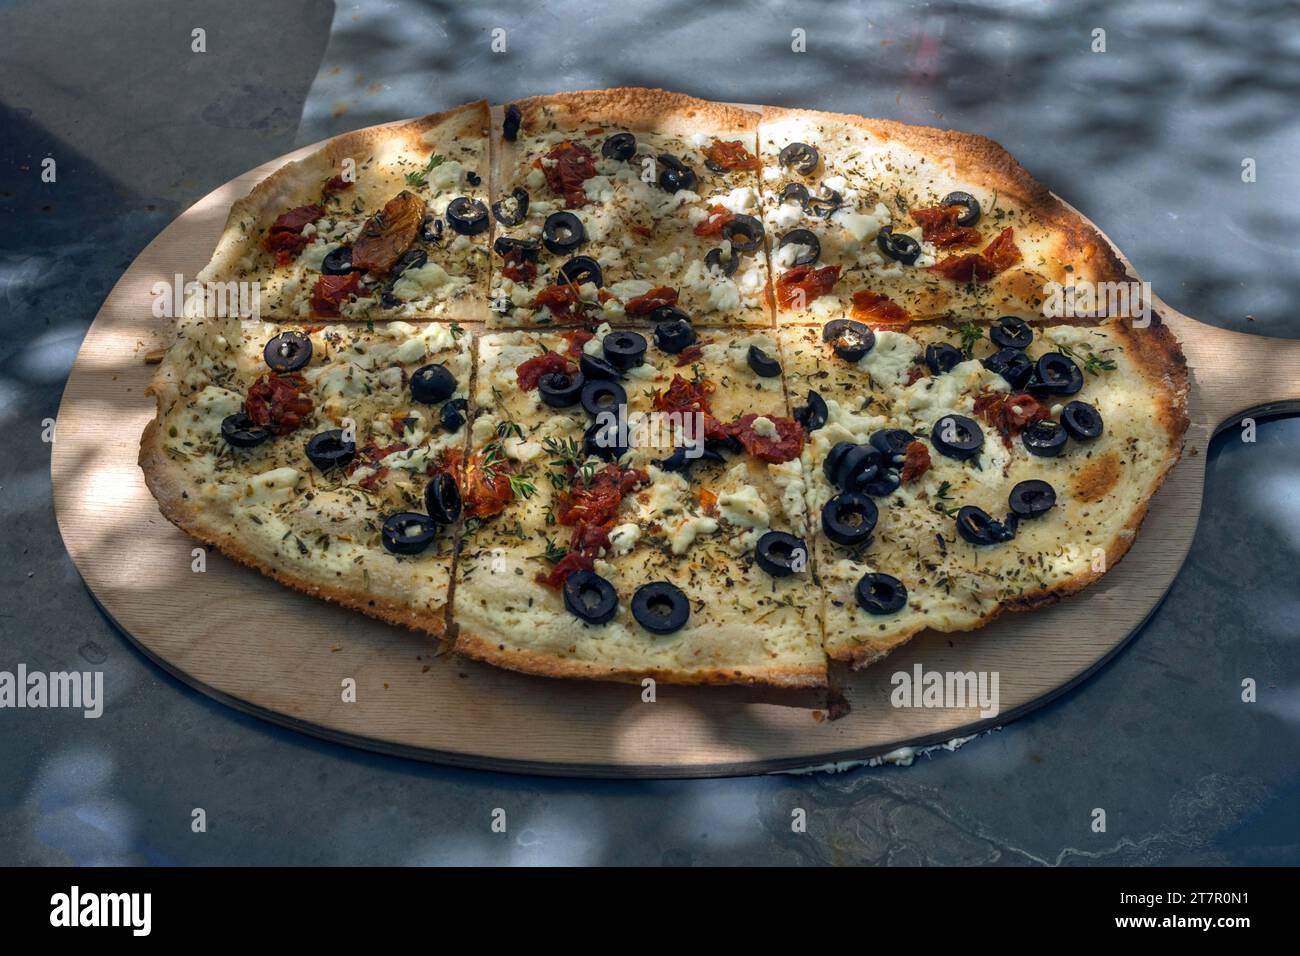 Tarte flambee with sun-dried tomatoes, feta cheese, olives and chives served on a wooden board, Bavaria, Germany Stock Photo